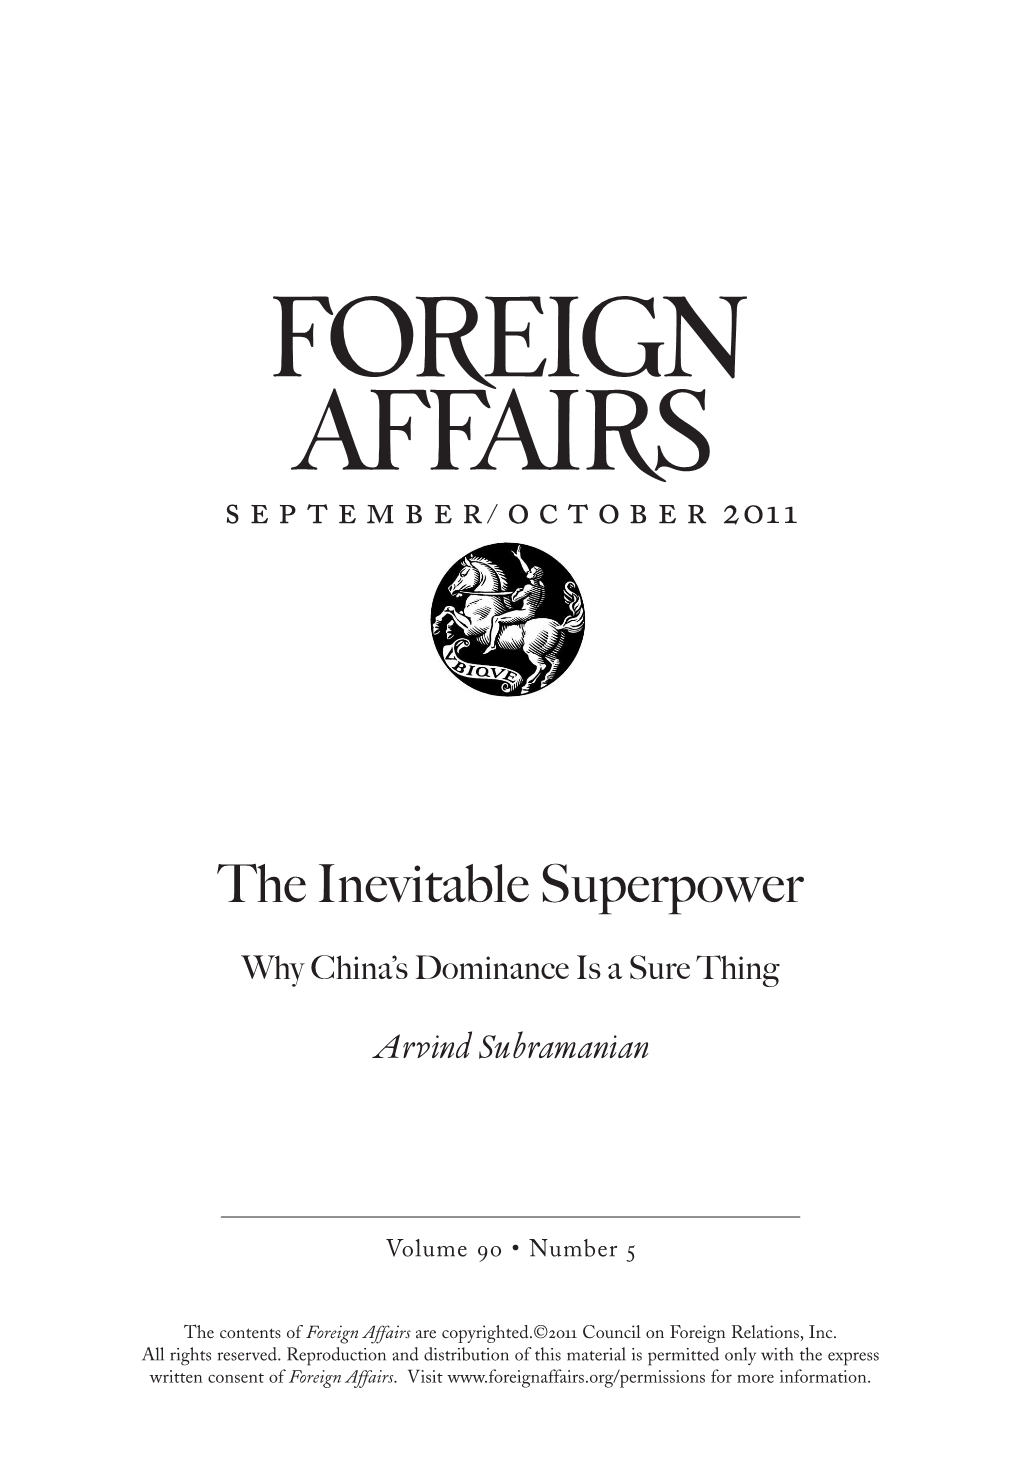 Article: the Inevitable Superpower: Why China's Dominance Is a Sure Thing